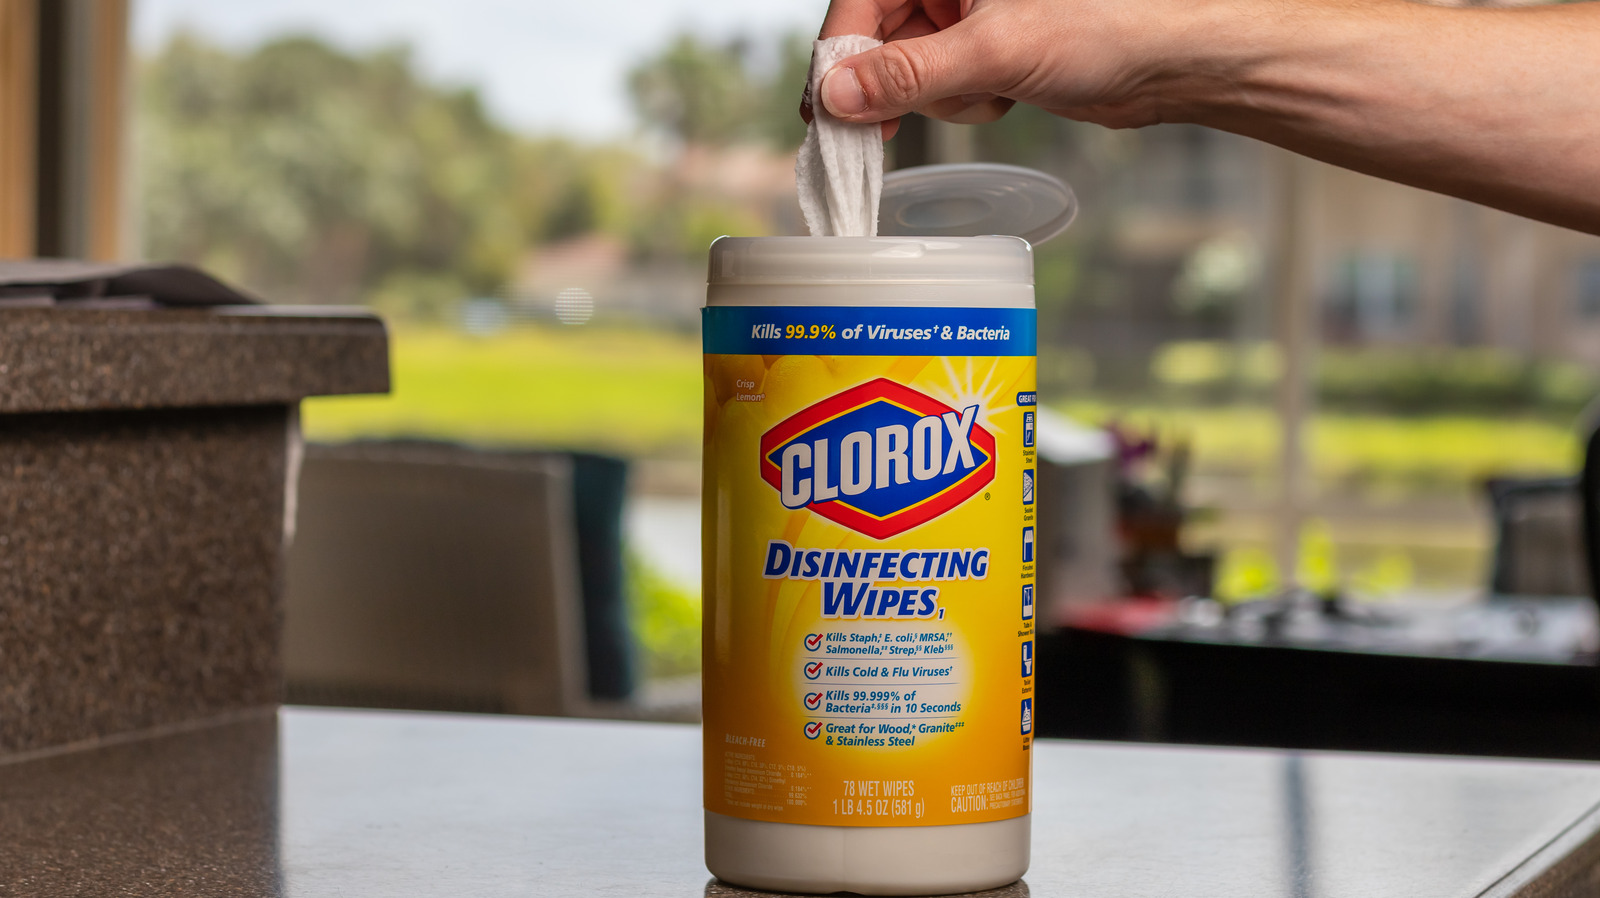 Why You Should Stop Using Clorox Wipes Immediately